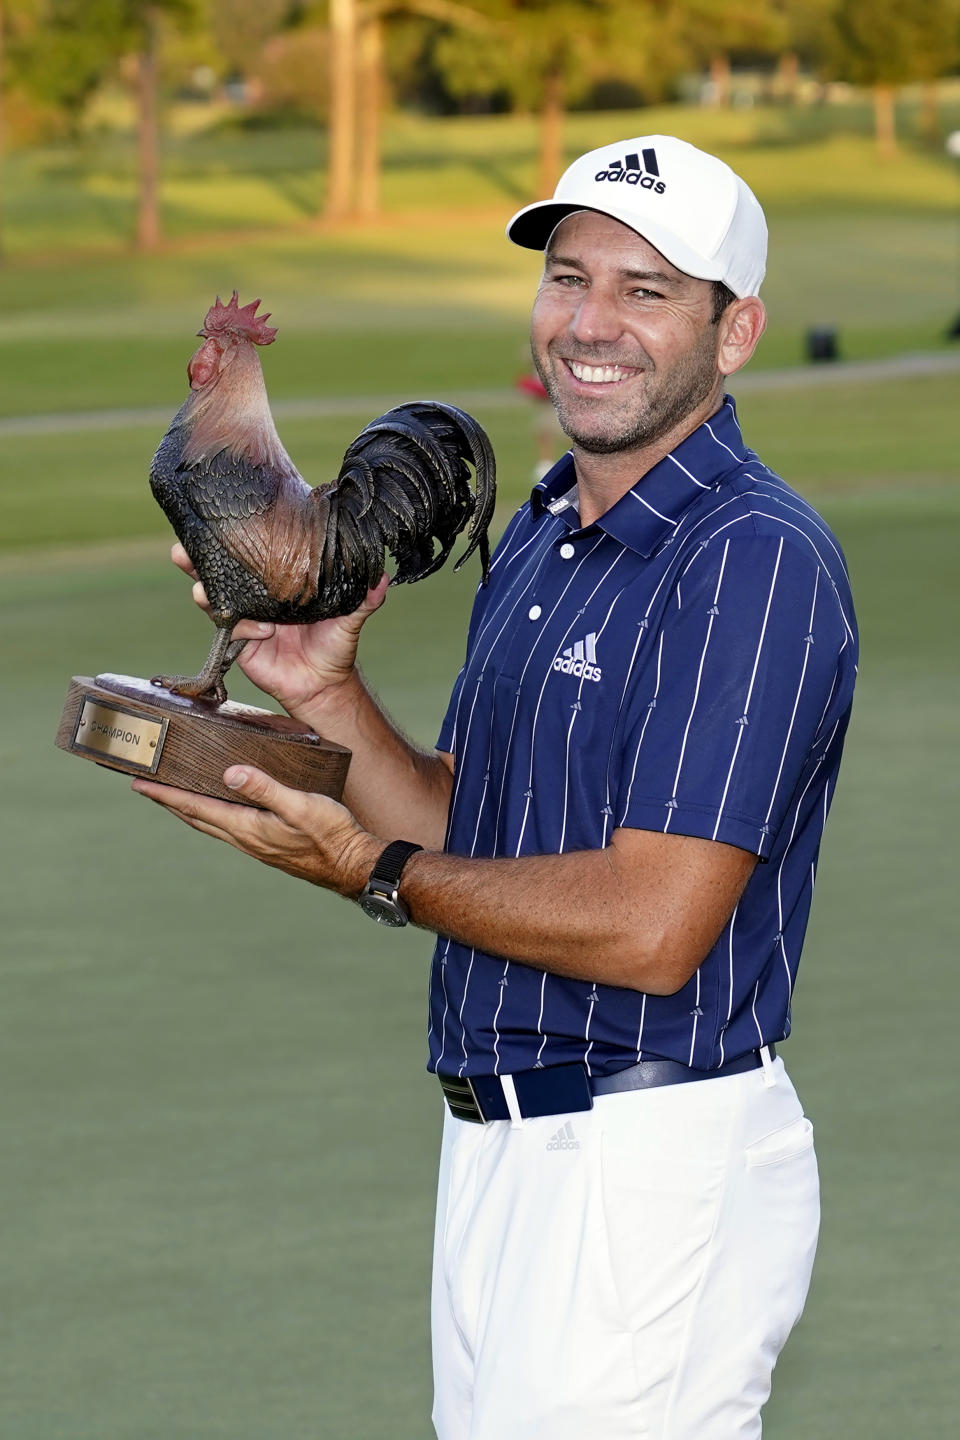 Sergio Garcia, of Spain, holds the Sanderson Farms Championship trophy after winning the PGA golf tournament in Jackson, Miss., Sunday, Oct. 4, 2020. (AP Photo/Rogelio V. Solis)